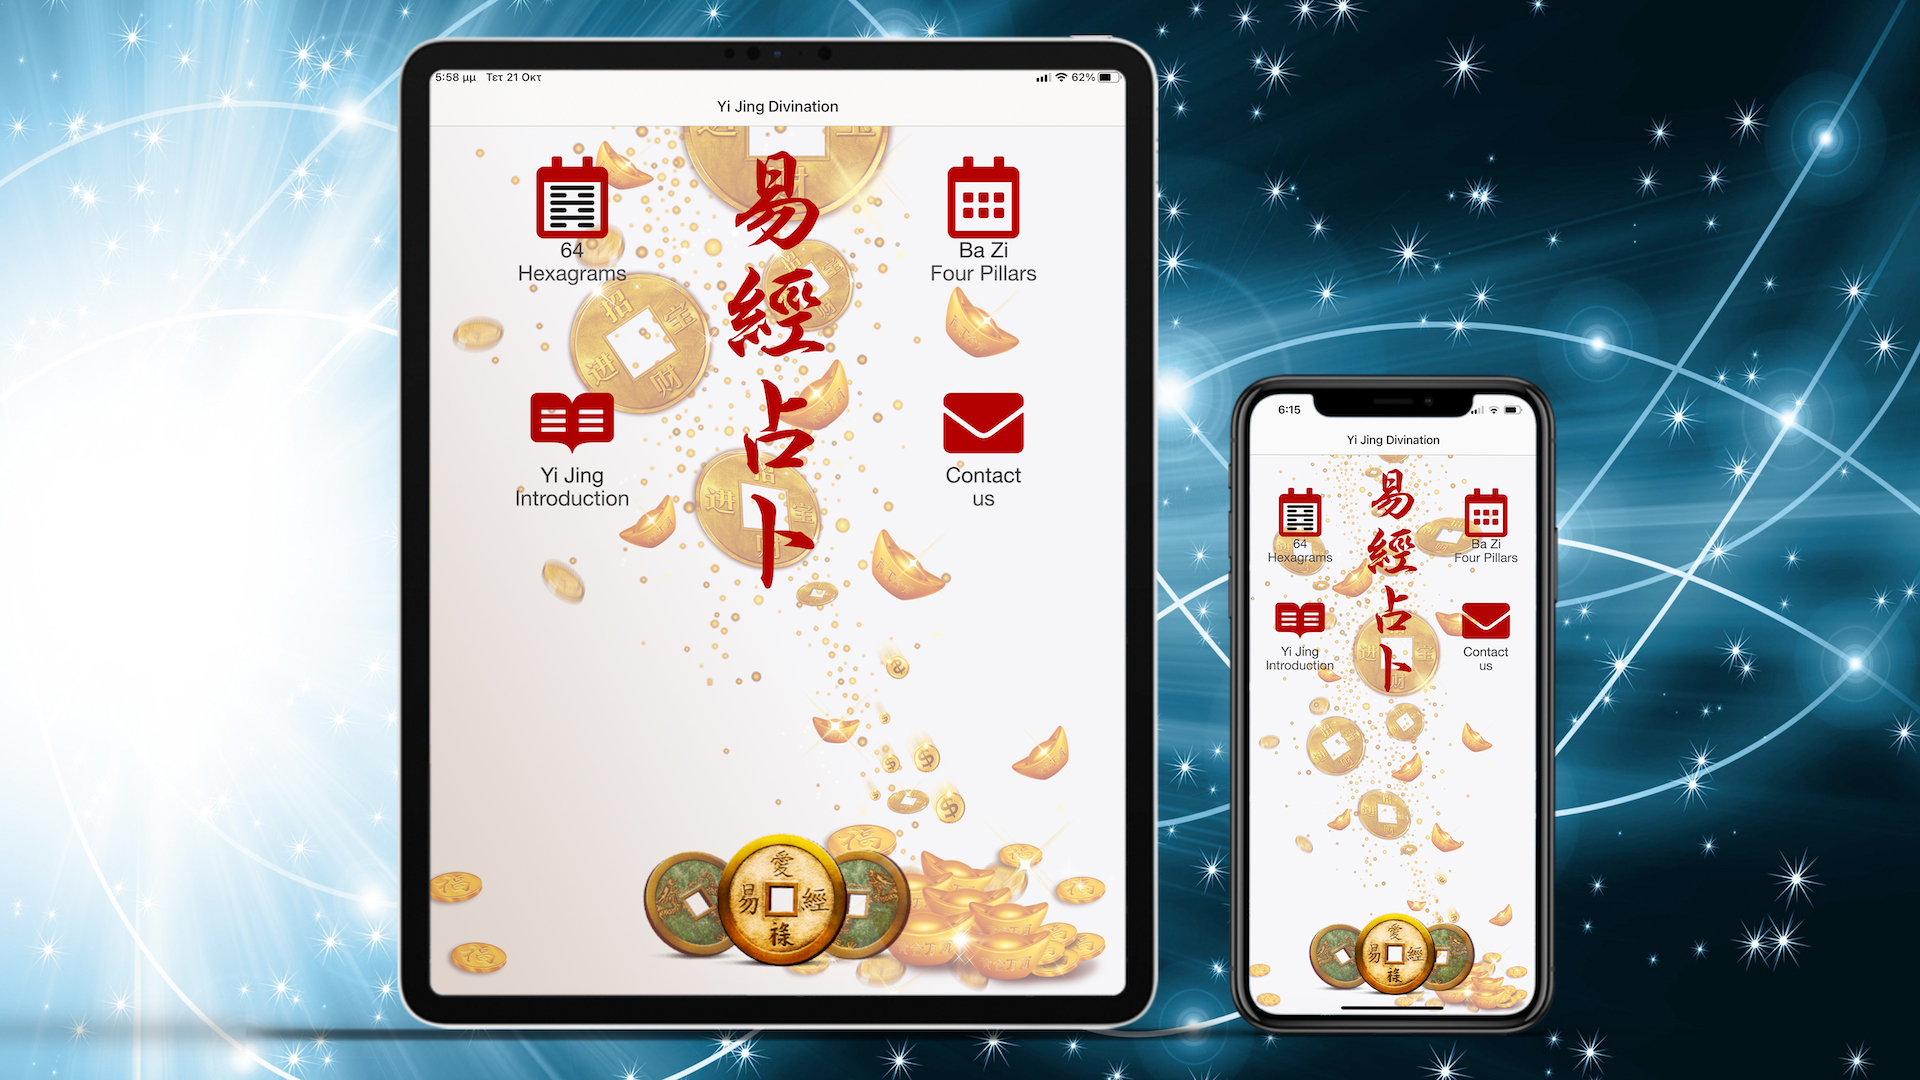 Yi Jing Divination App for iPhone and iPad